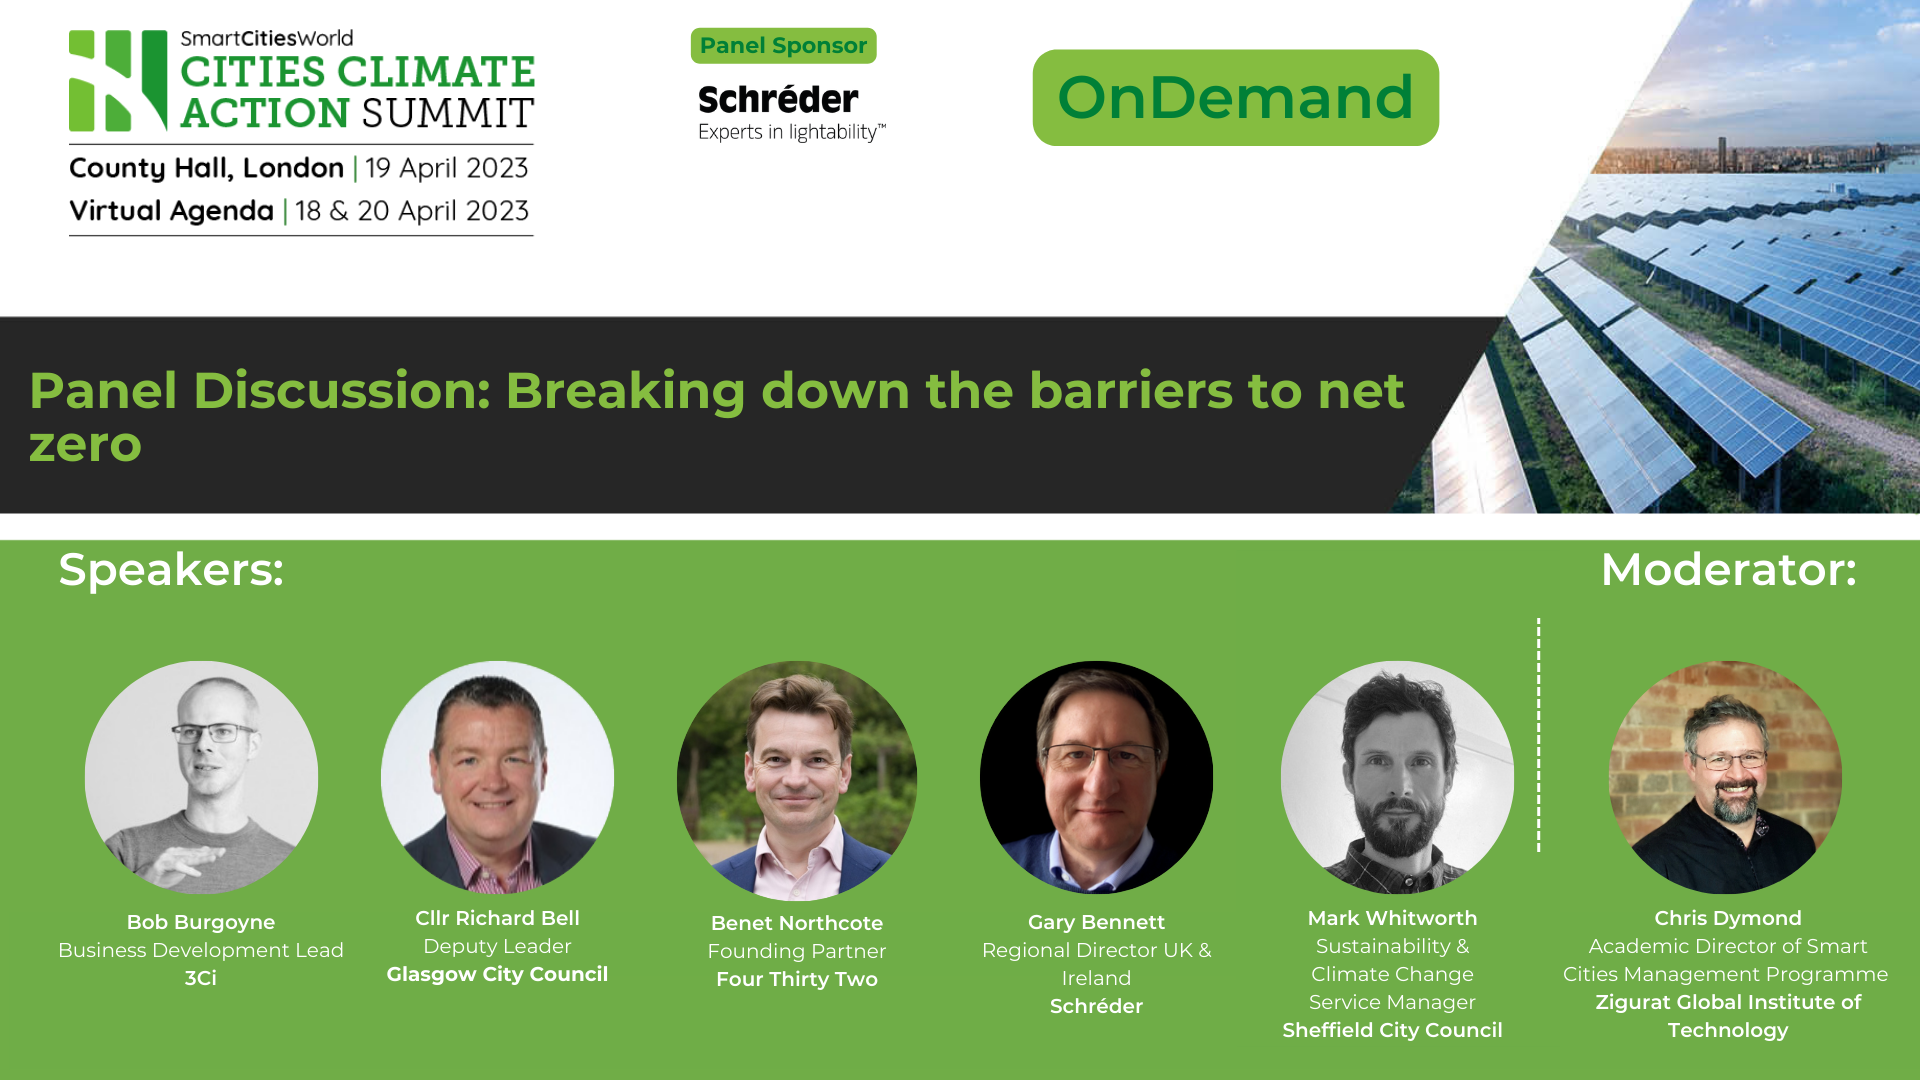 OnDemand Panel discussion: Breaking down the barriers to net zero